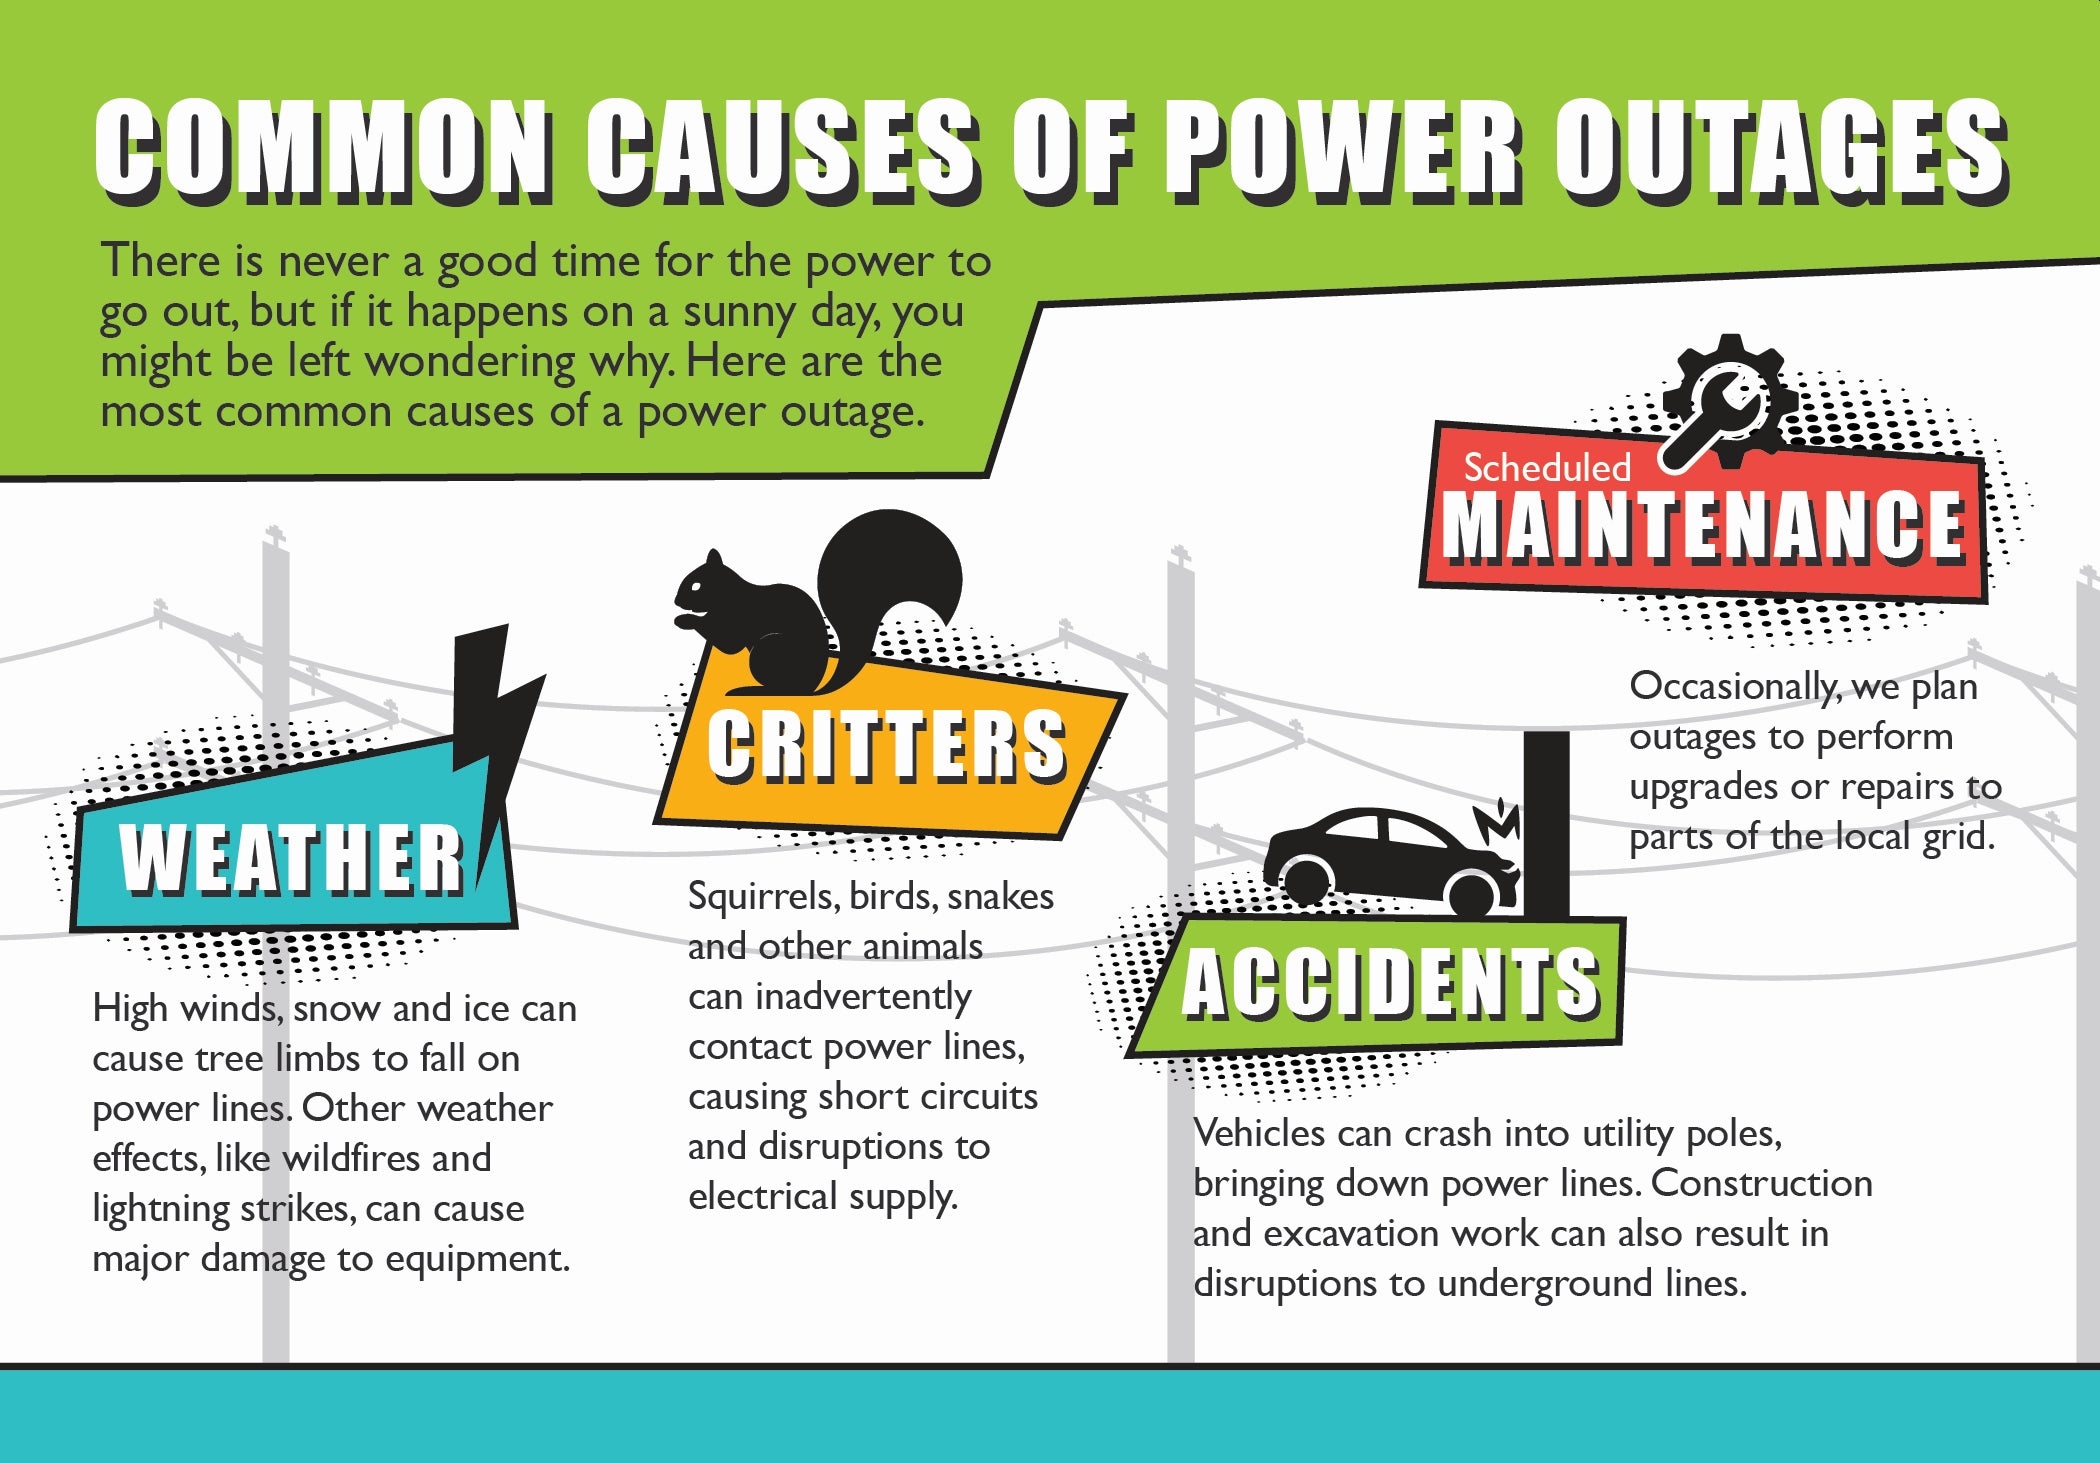 Causes of power outages.